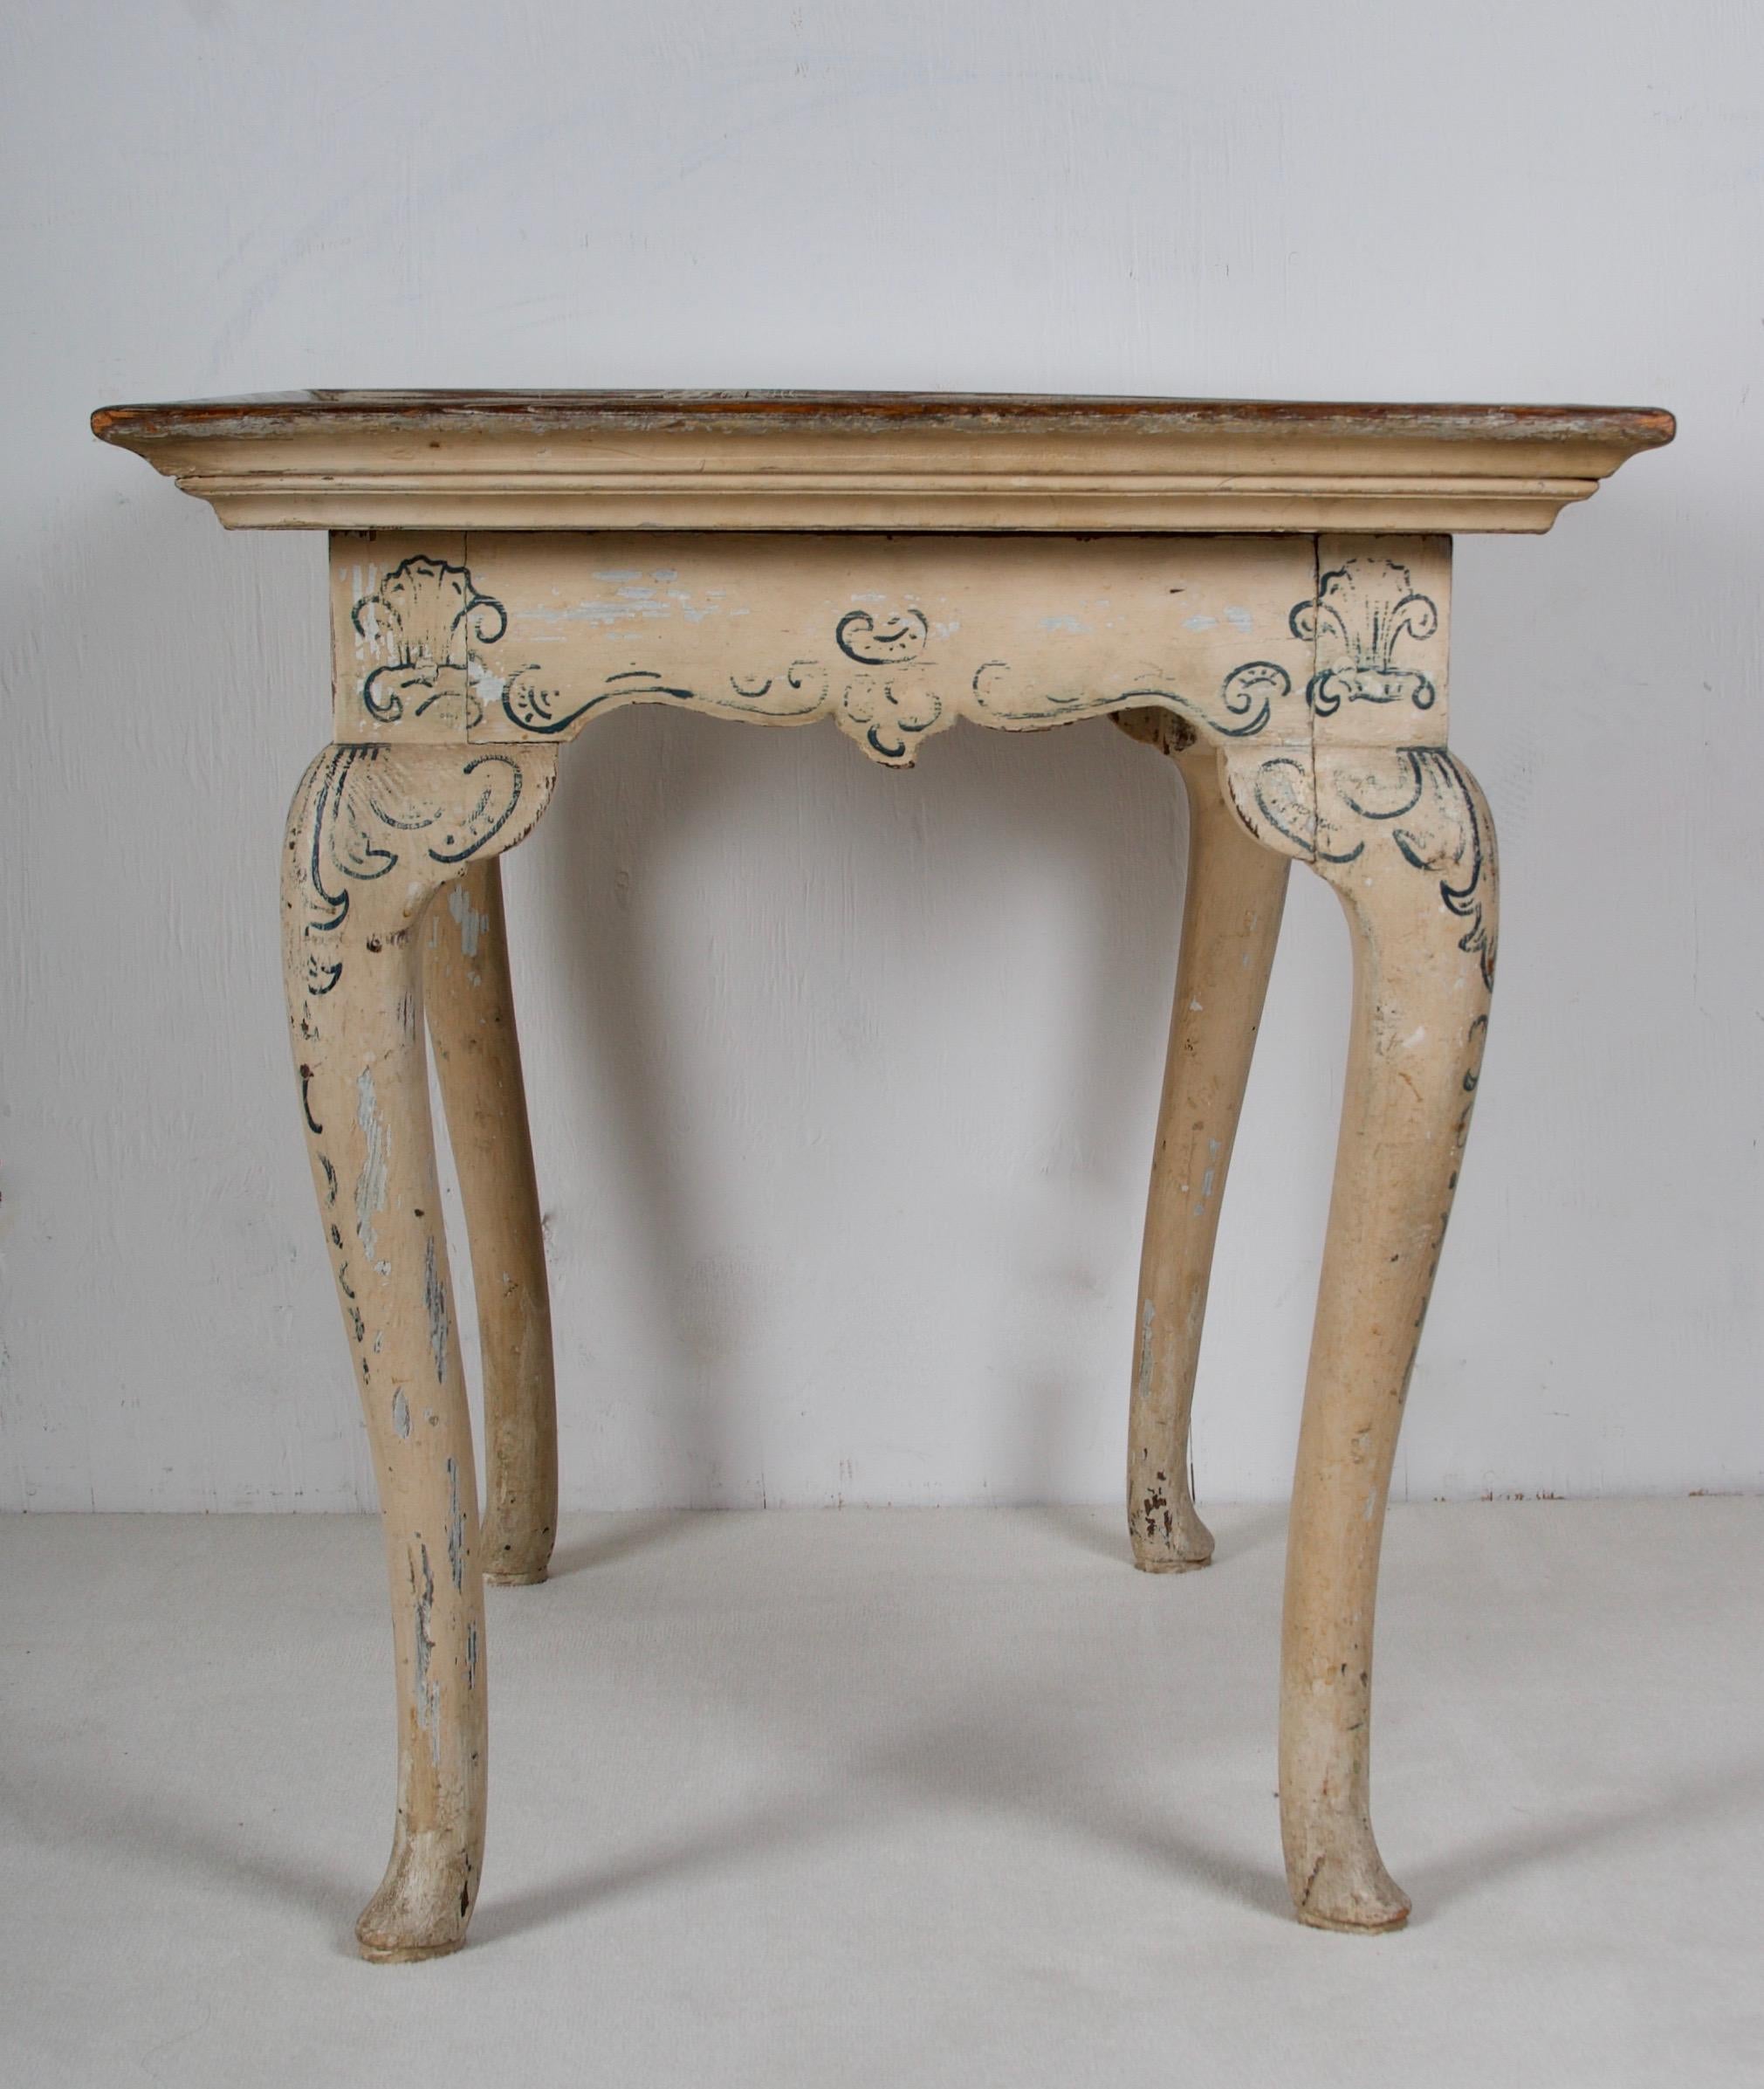 18th Century and Earlier 17th Cent. Delft Tile Inset into a 18th Cent. Dutch Side Table with Paint Decor